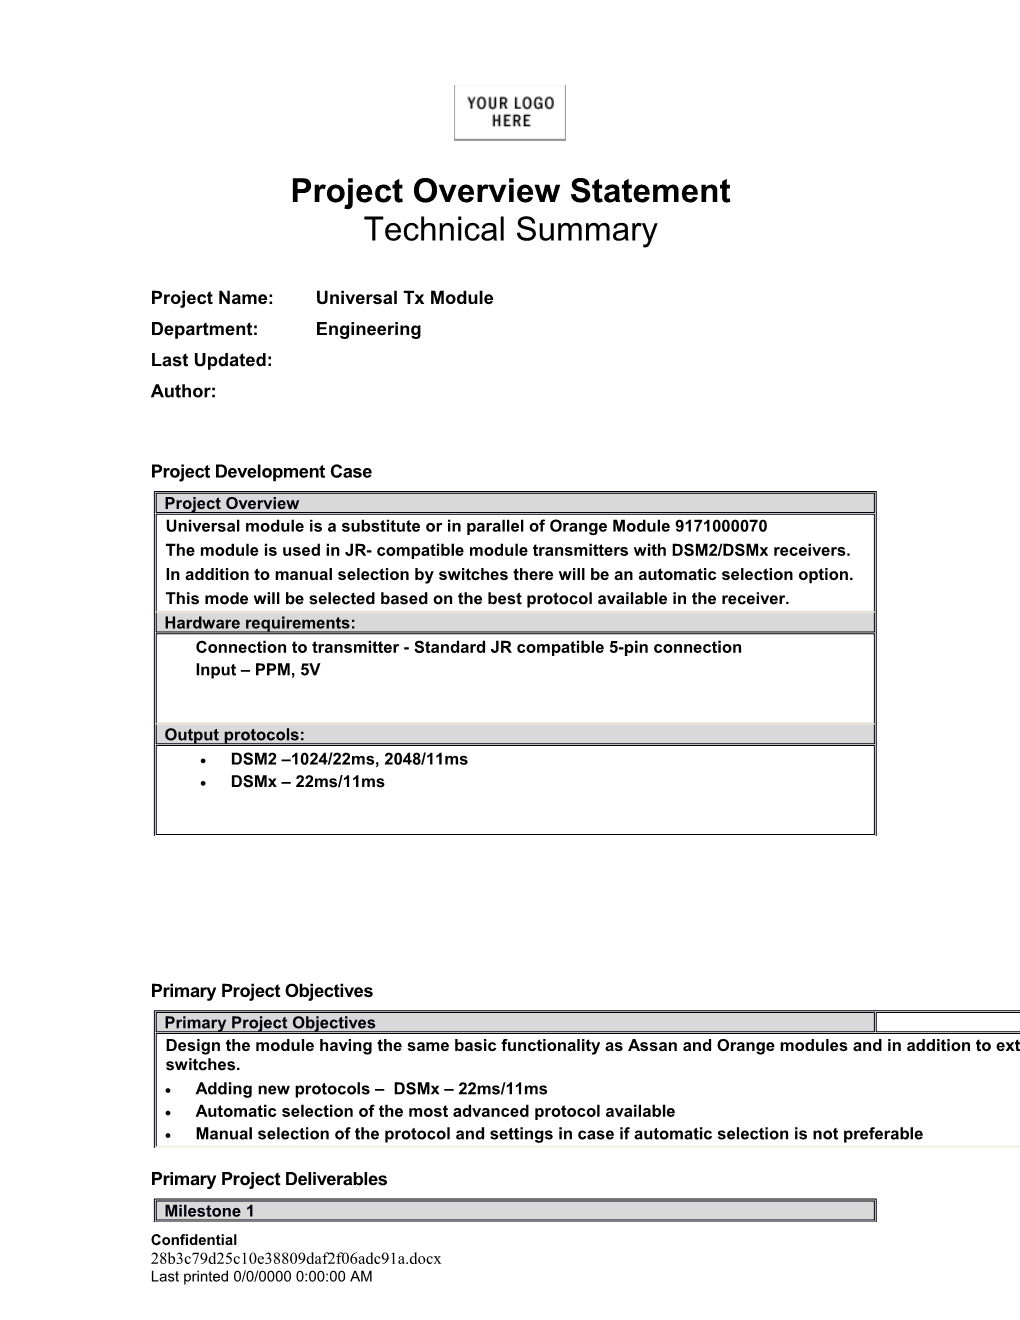 Project Overview Statement Executive Summary